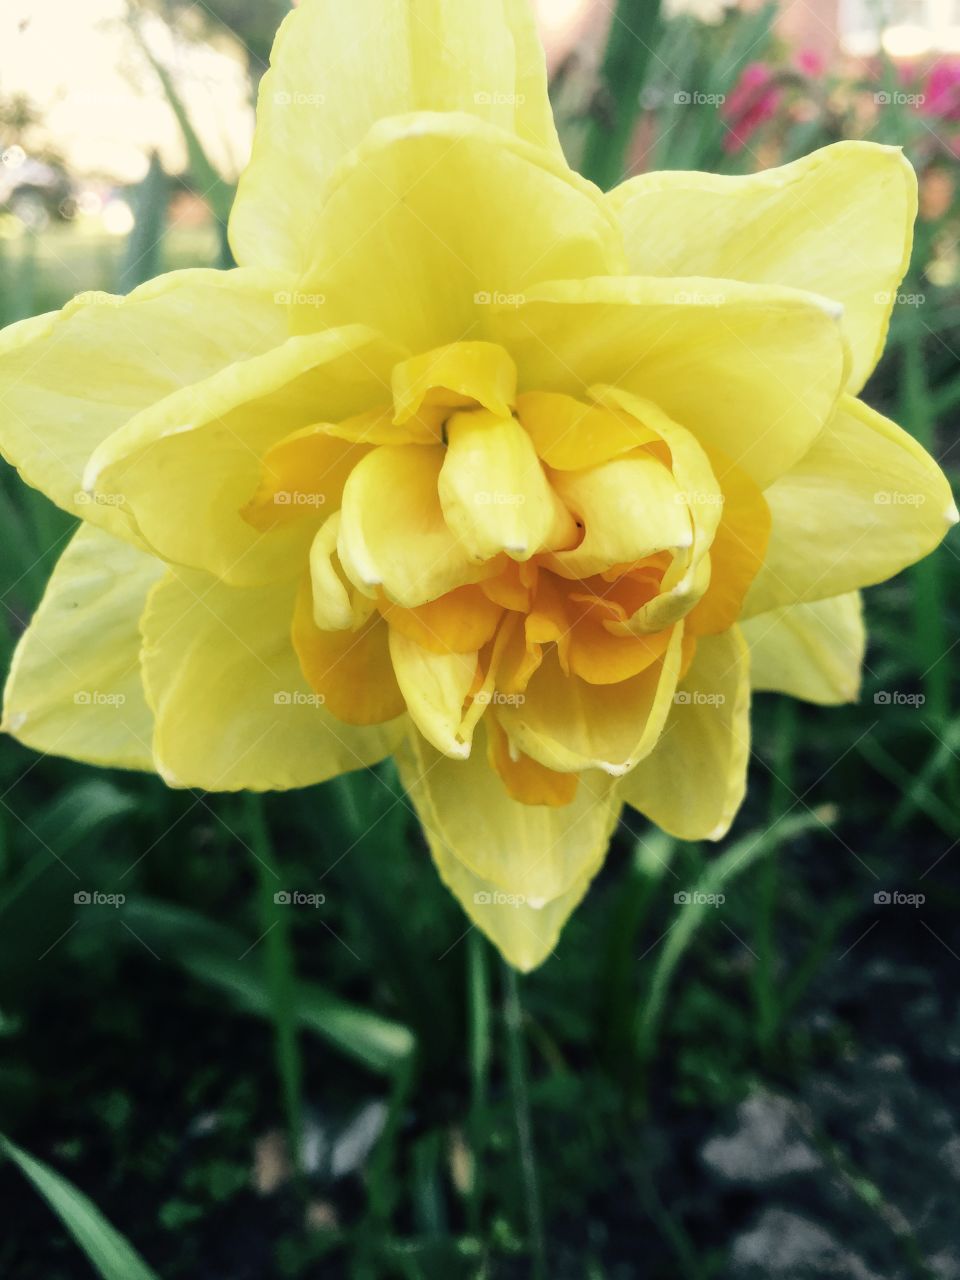 Fancy daffodil with yellow and peach color in center making a very nice closeup from my garden.